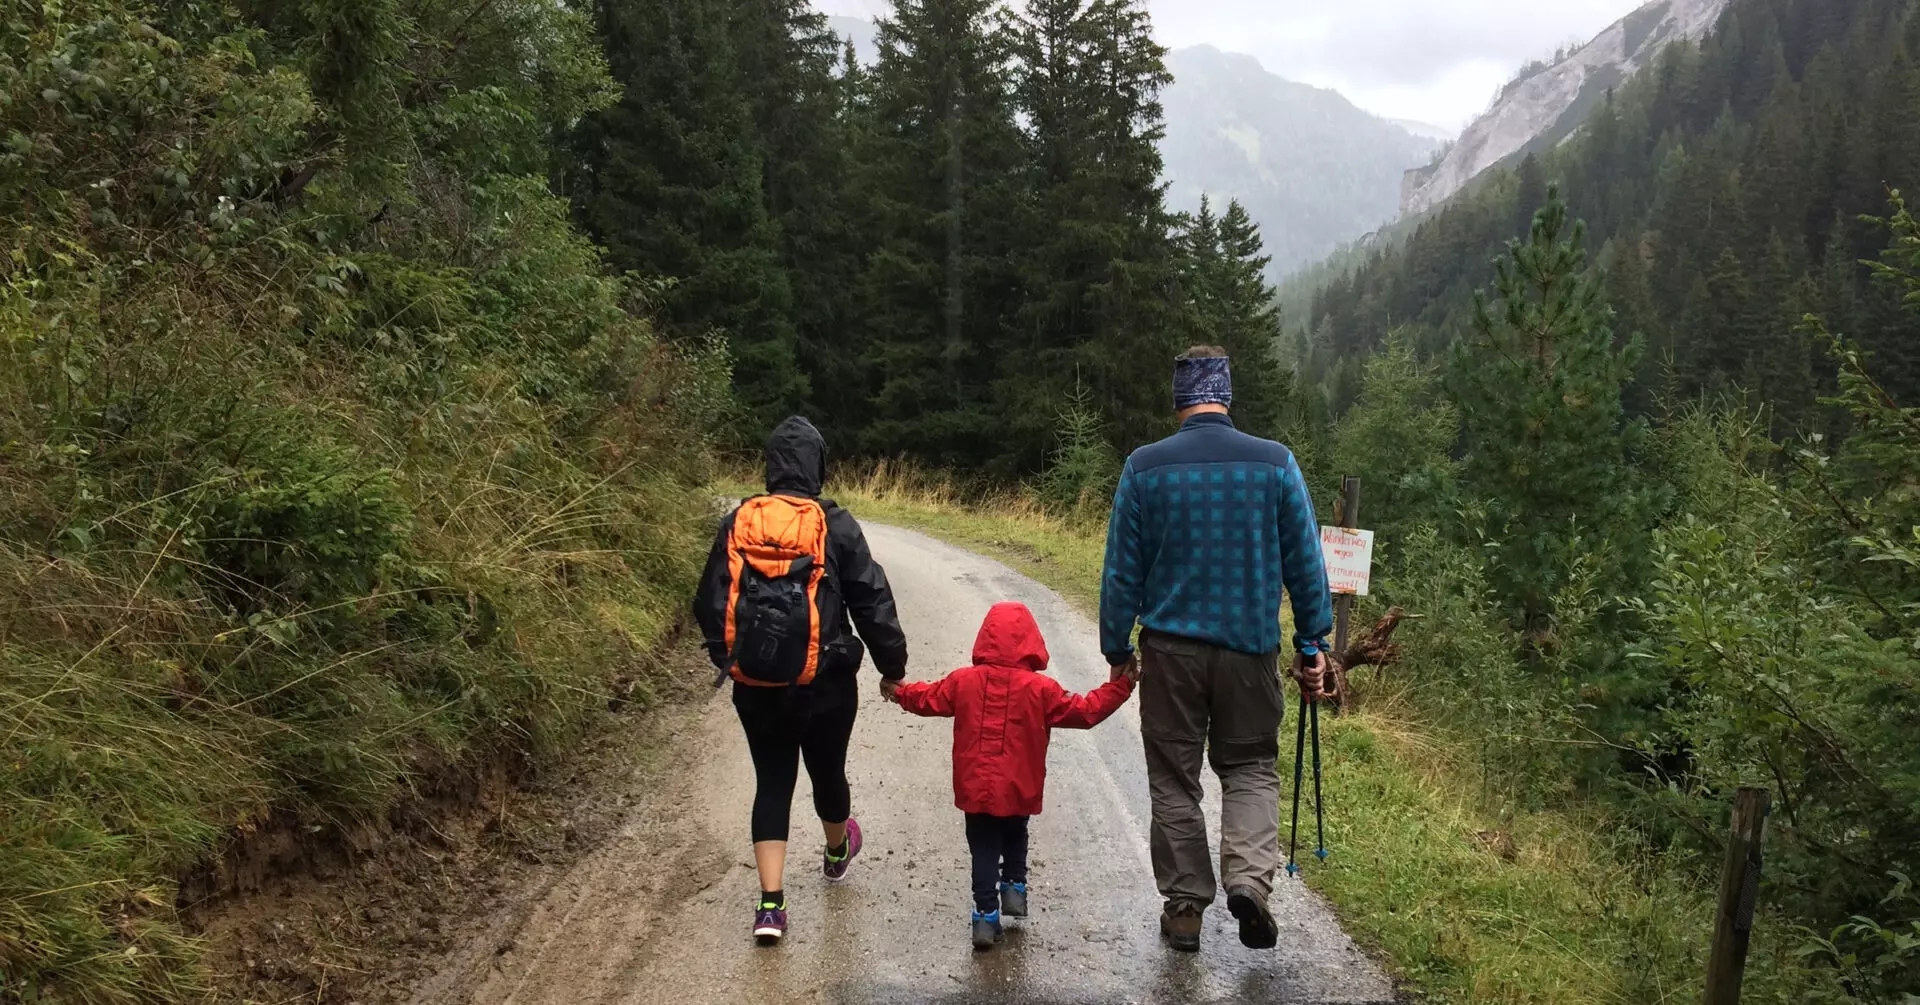 Family walks in the woods on a rainy day